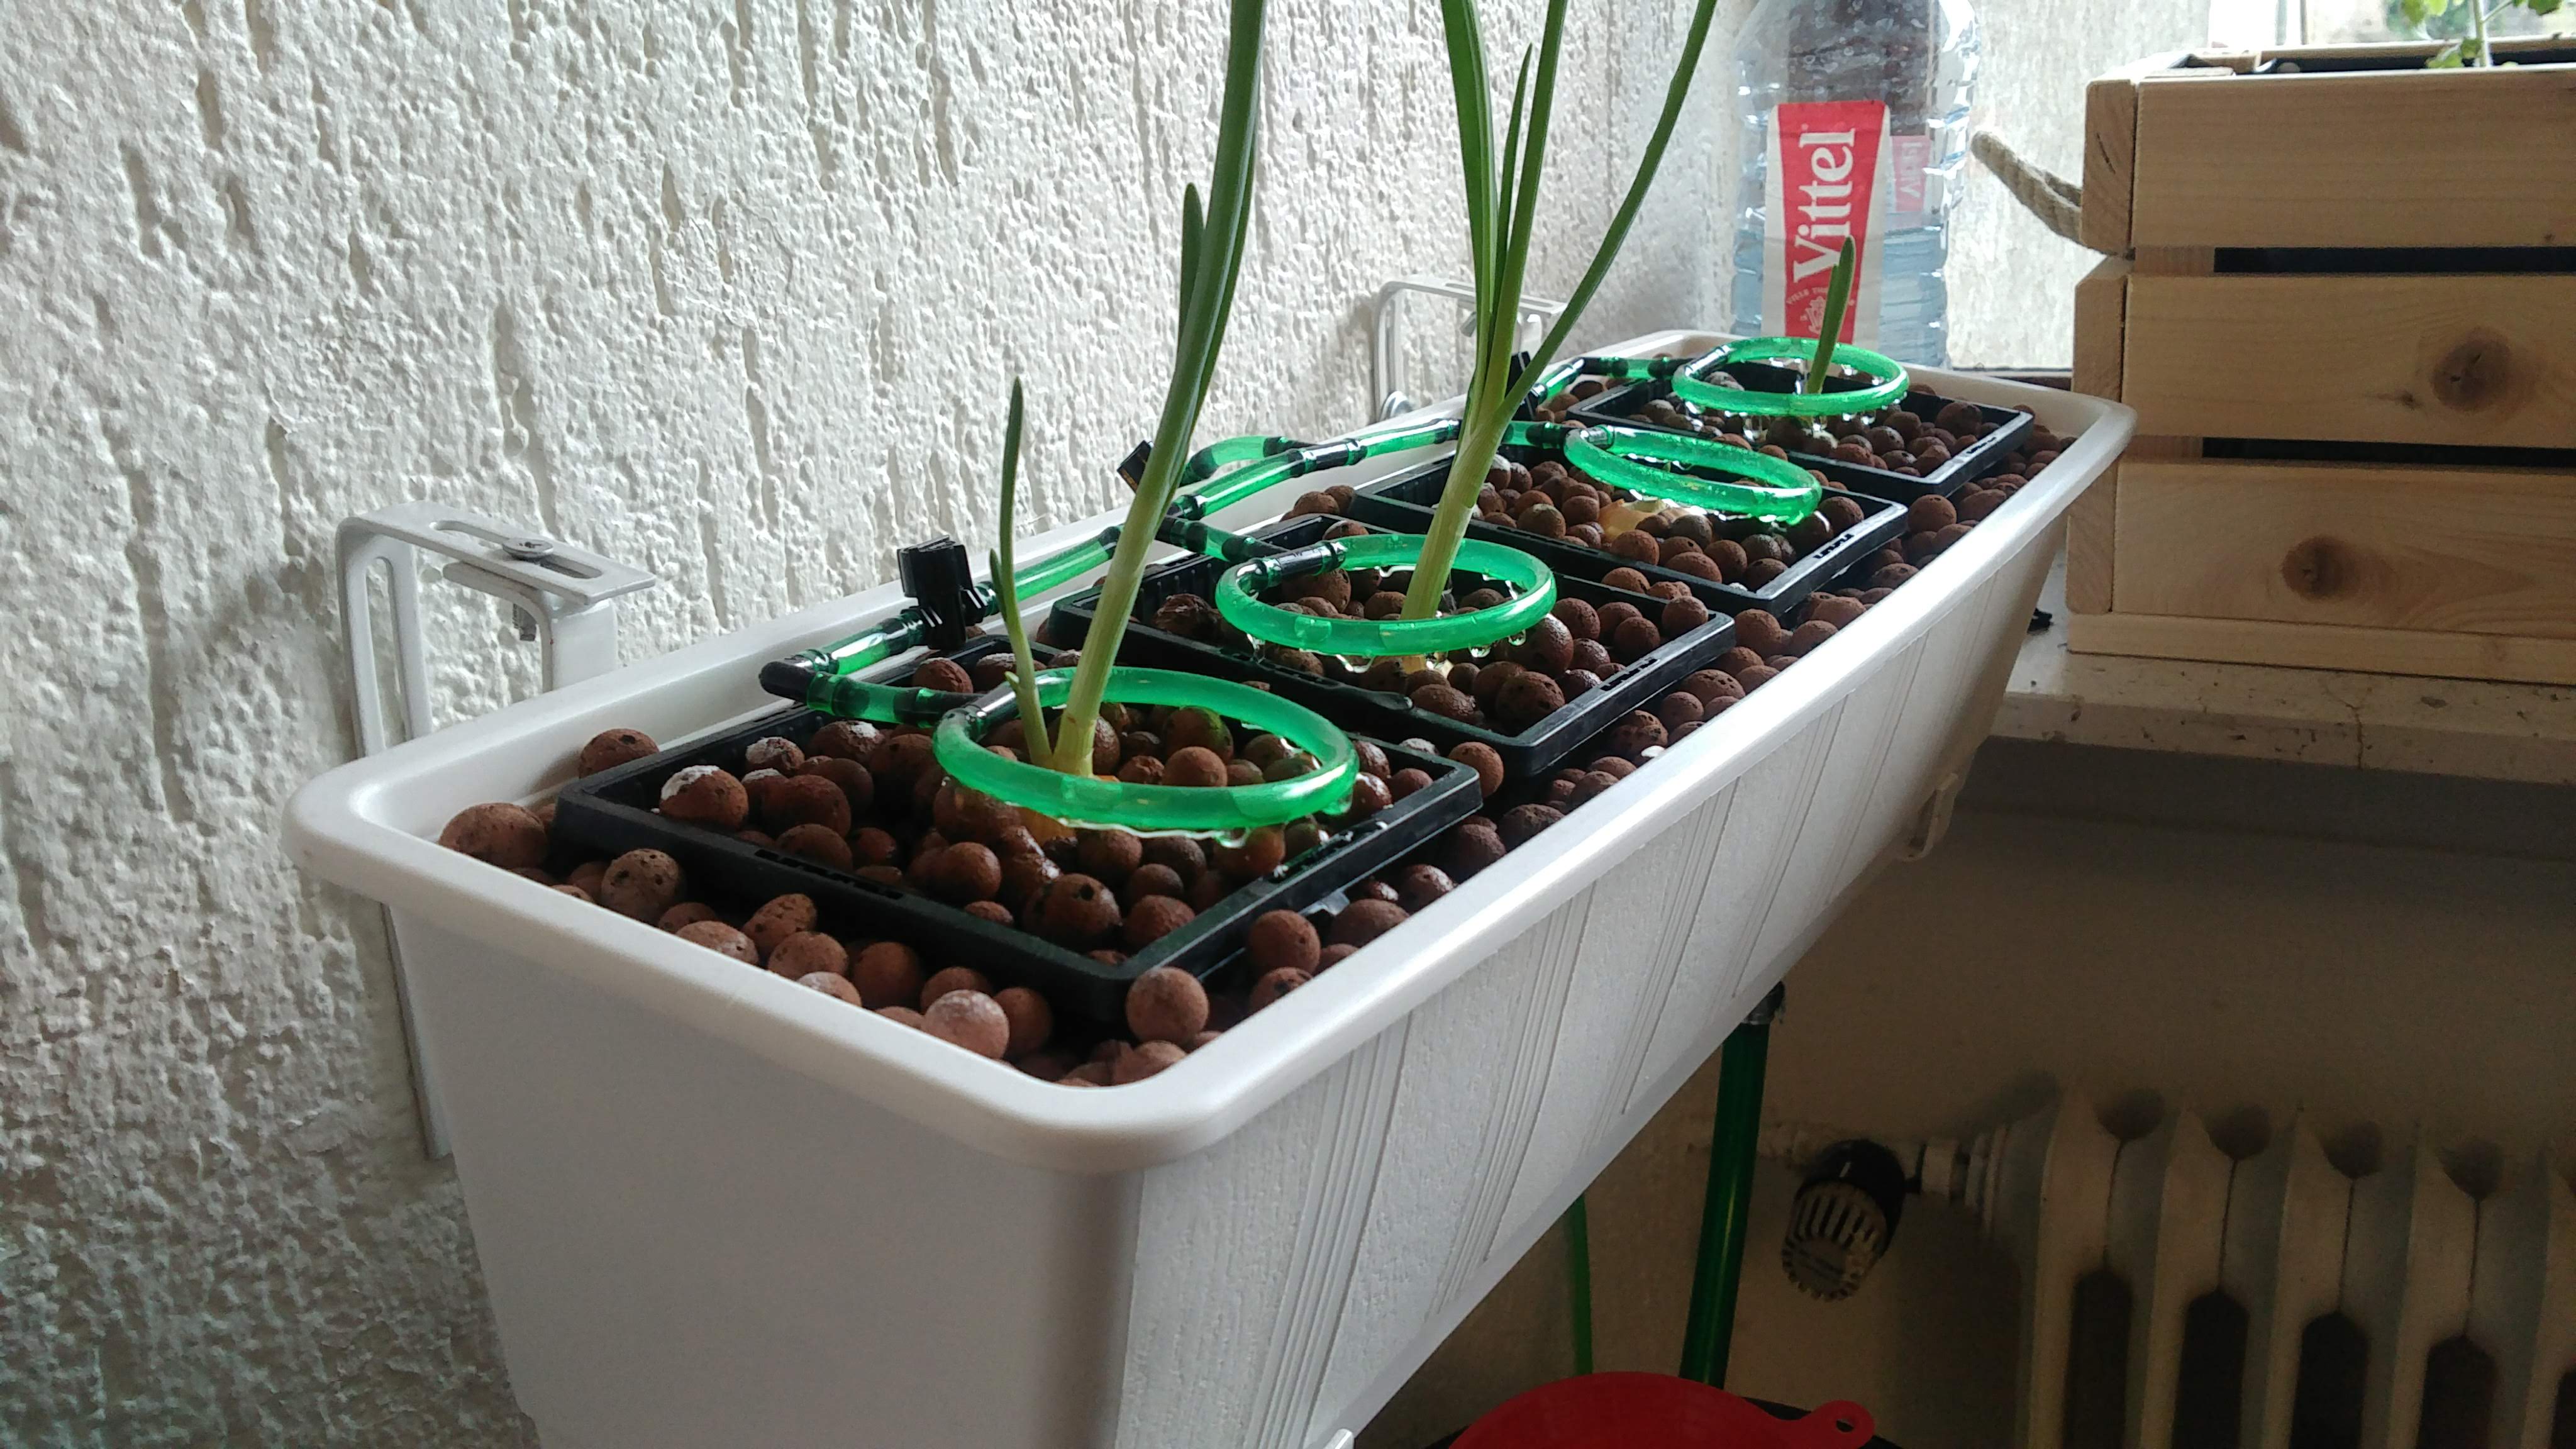 Building a compact hydroponic system at home